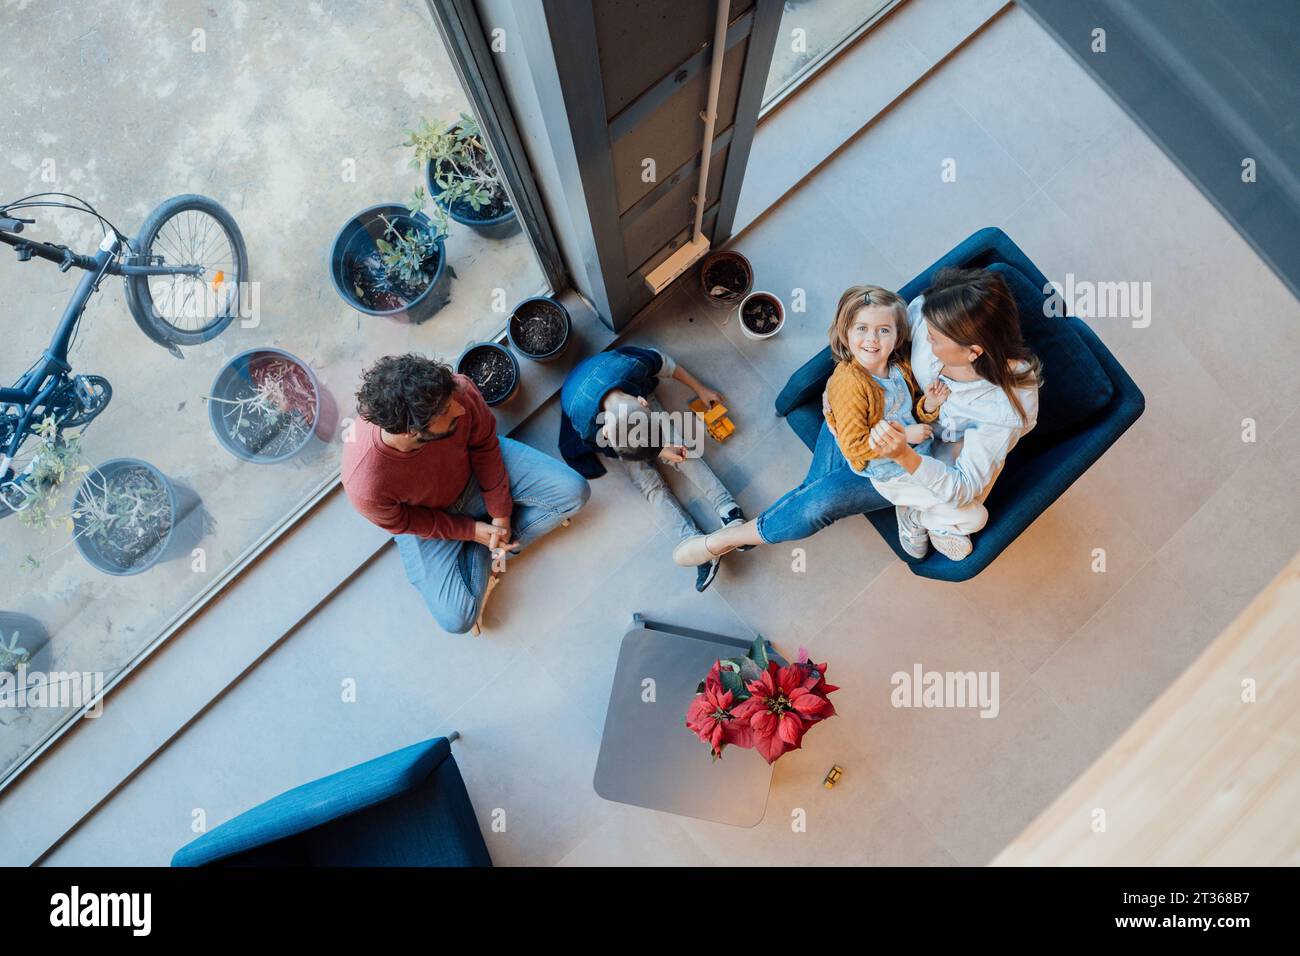 Family spending leisure time sitting at home Stock Photo